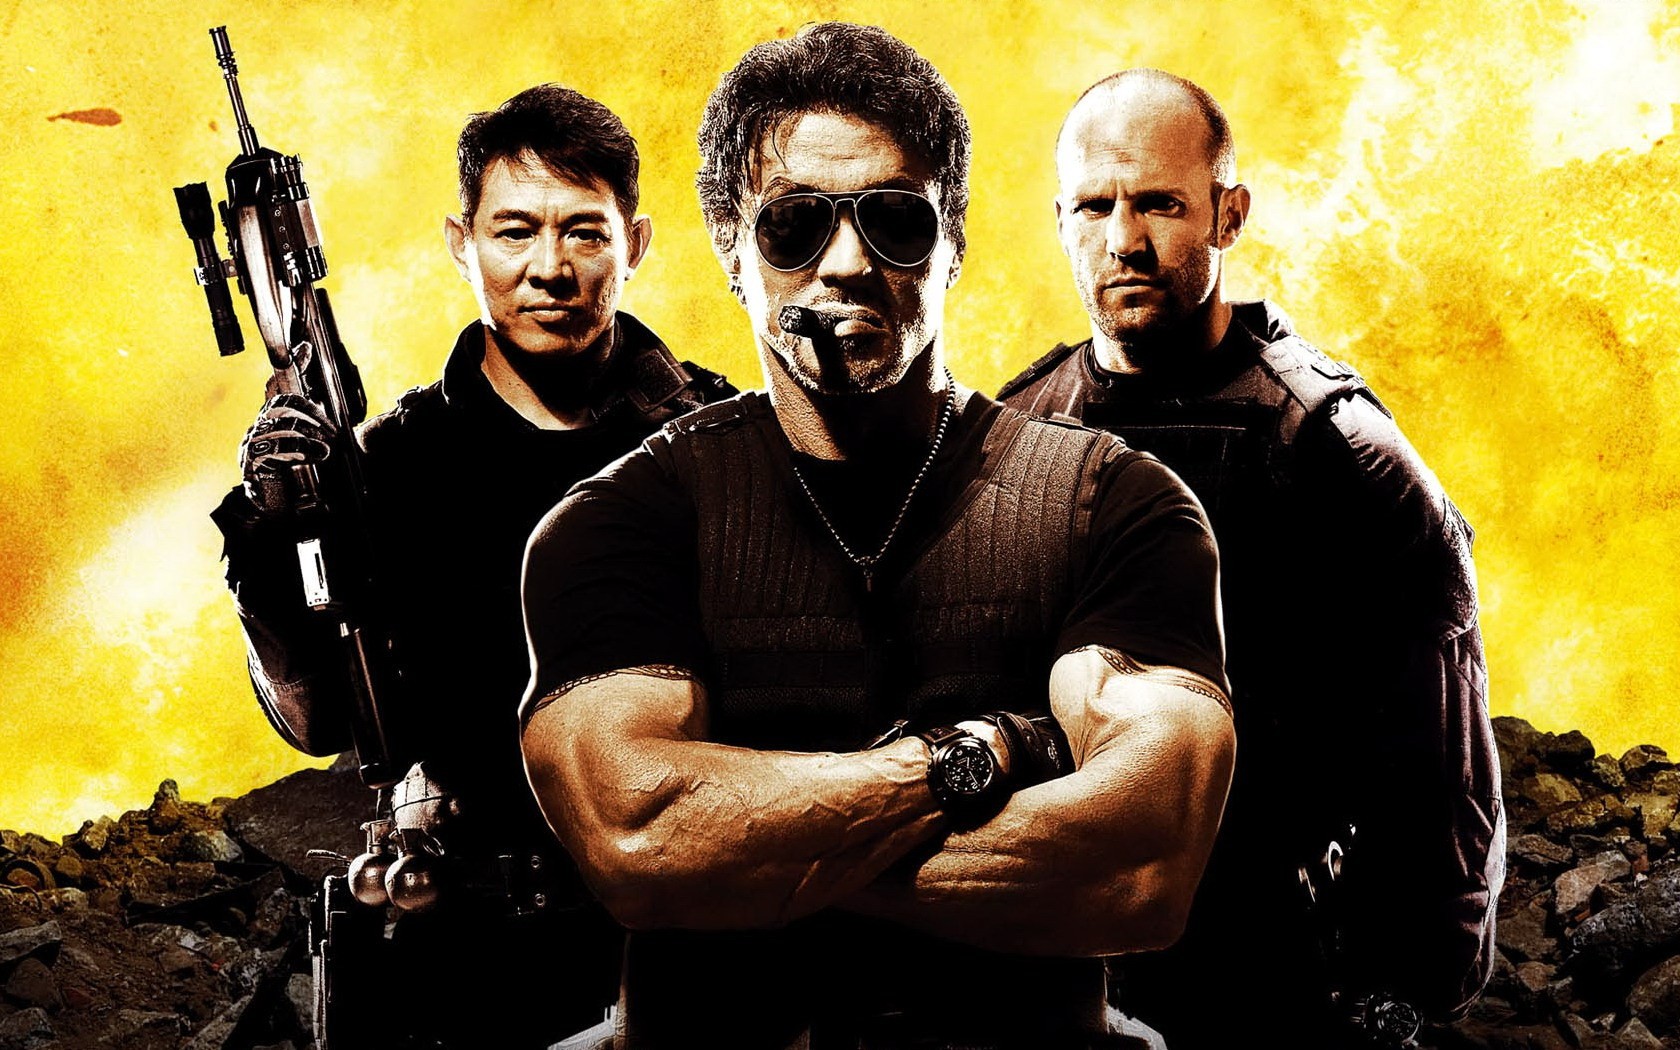 movie, the expendables, barney ross, jason statham, jet li, lee christmas, sylvester stallone, yin yang (the expendables)